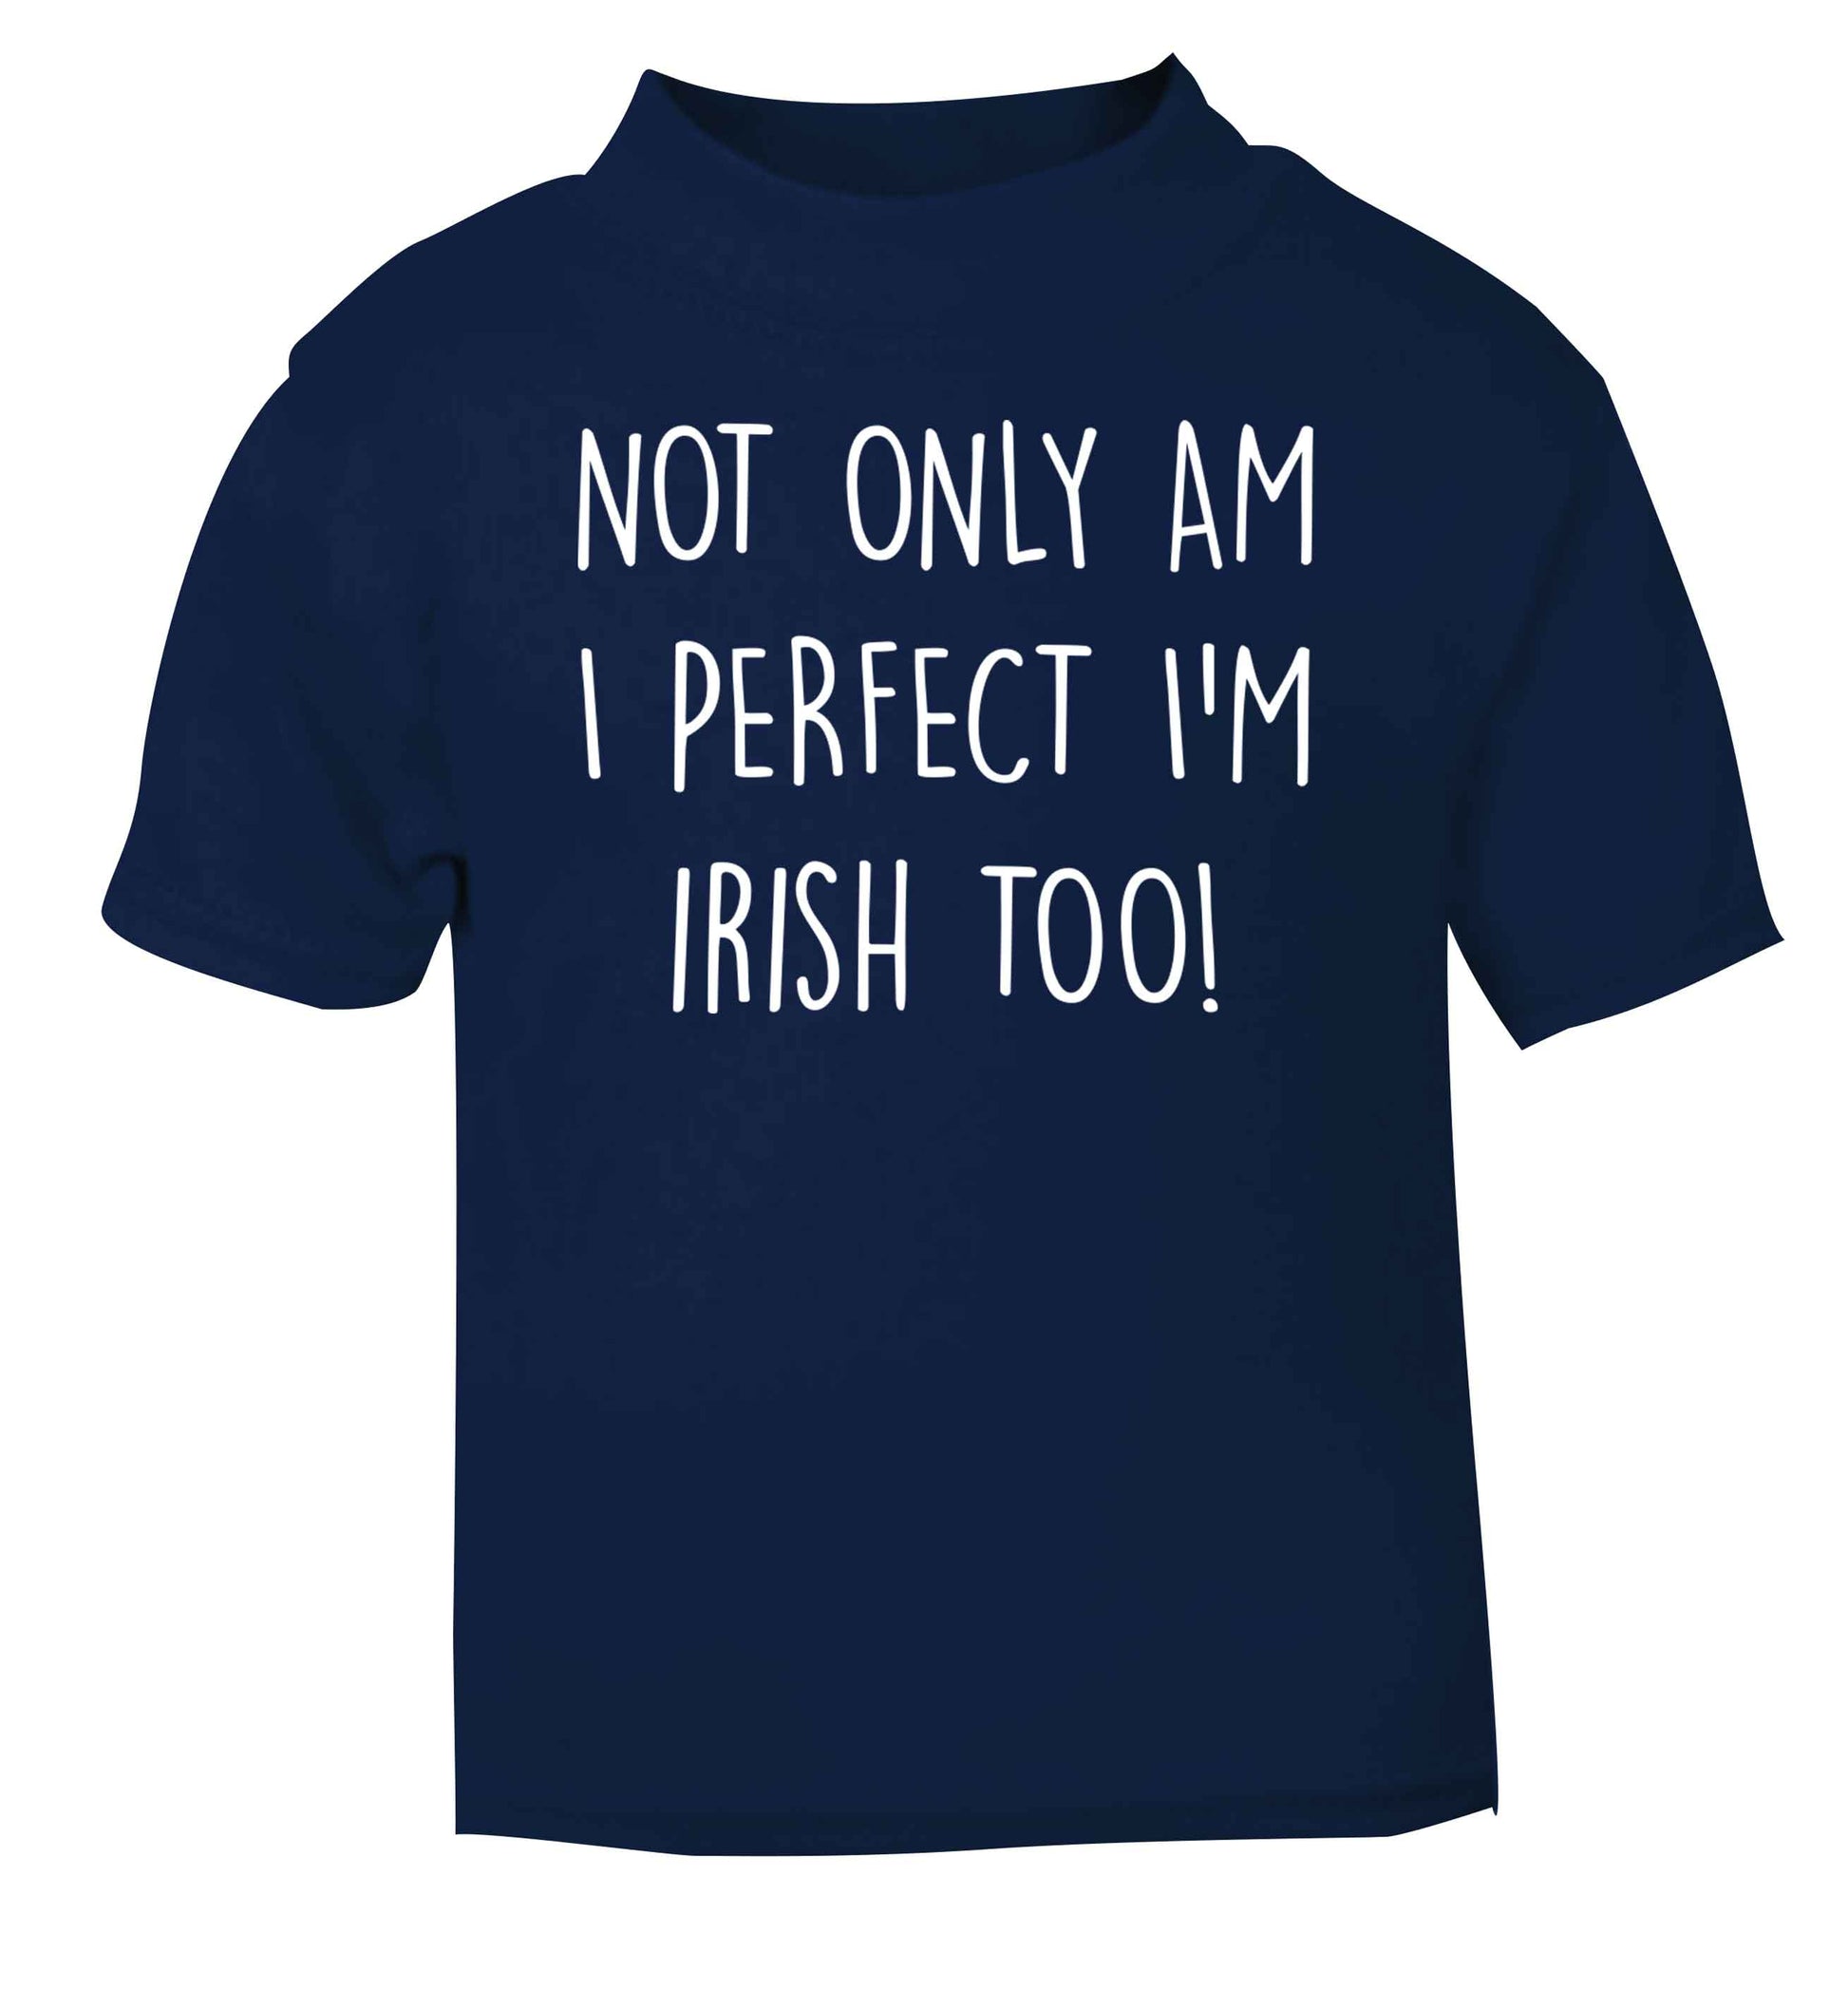 Not only am I perfect I'm Irish too! navy baby toddler Tshirt 2 Years